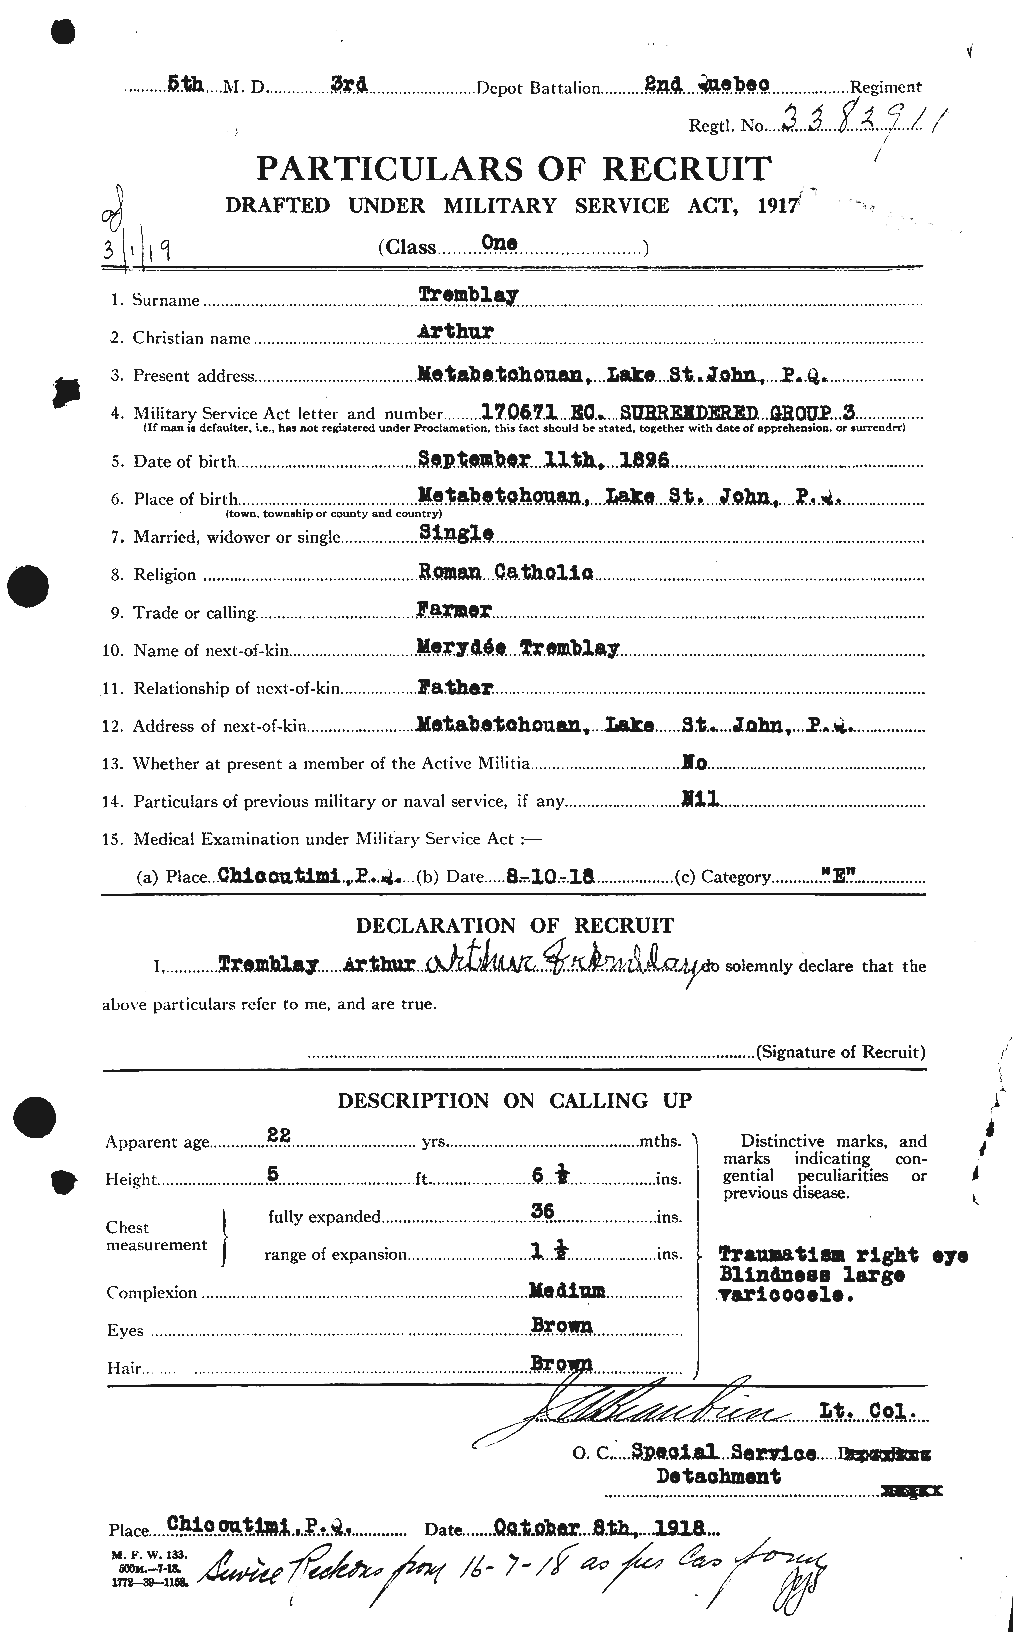 Personnel Records of the First World War - CEF 638957a